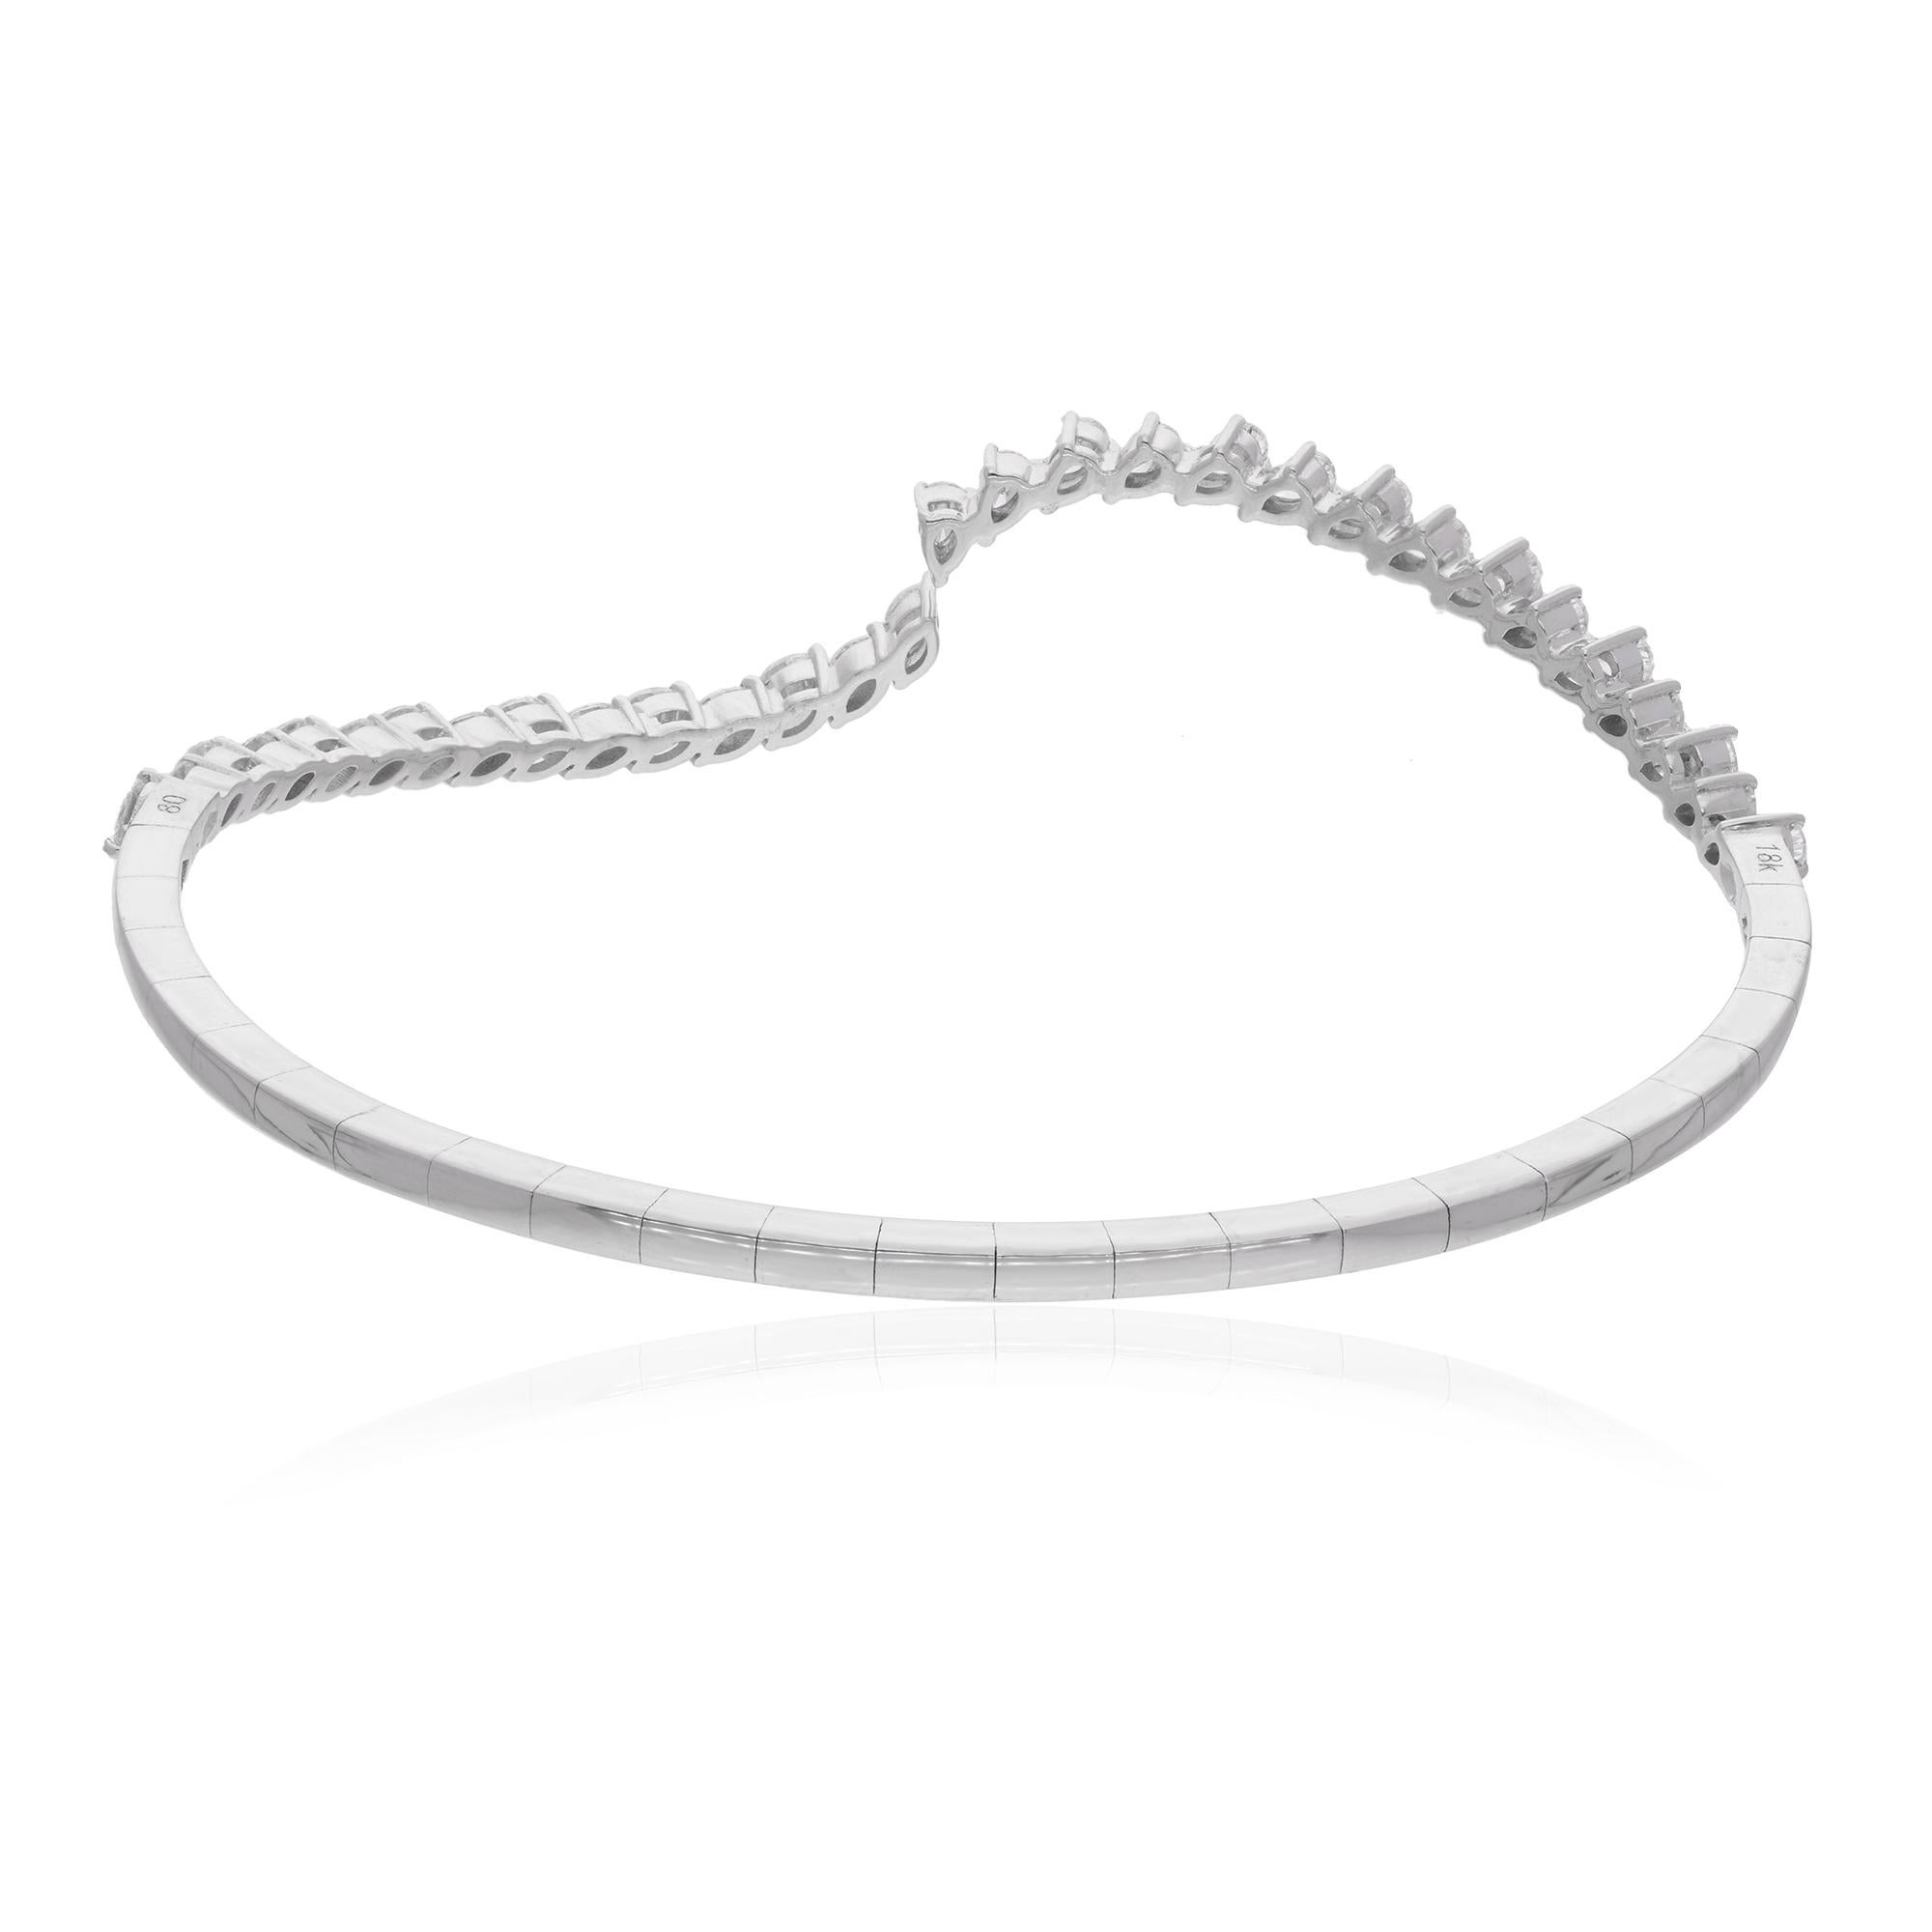 Add a touch of luxury to your jewelry collection with this exquisite Gold Diamond Bangle Bracelet. Crafted from 18k solid gold, this bracelet features a sleek and elegant design, with a band of shimmering diamonds carefully set to catch the light